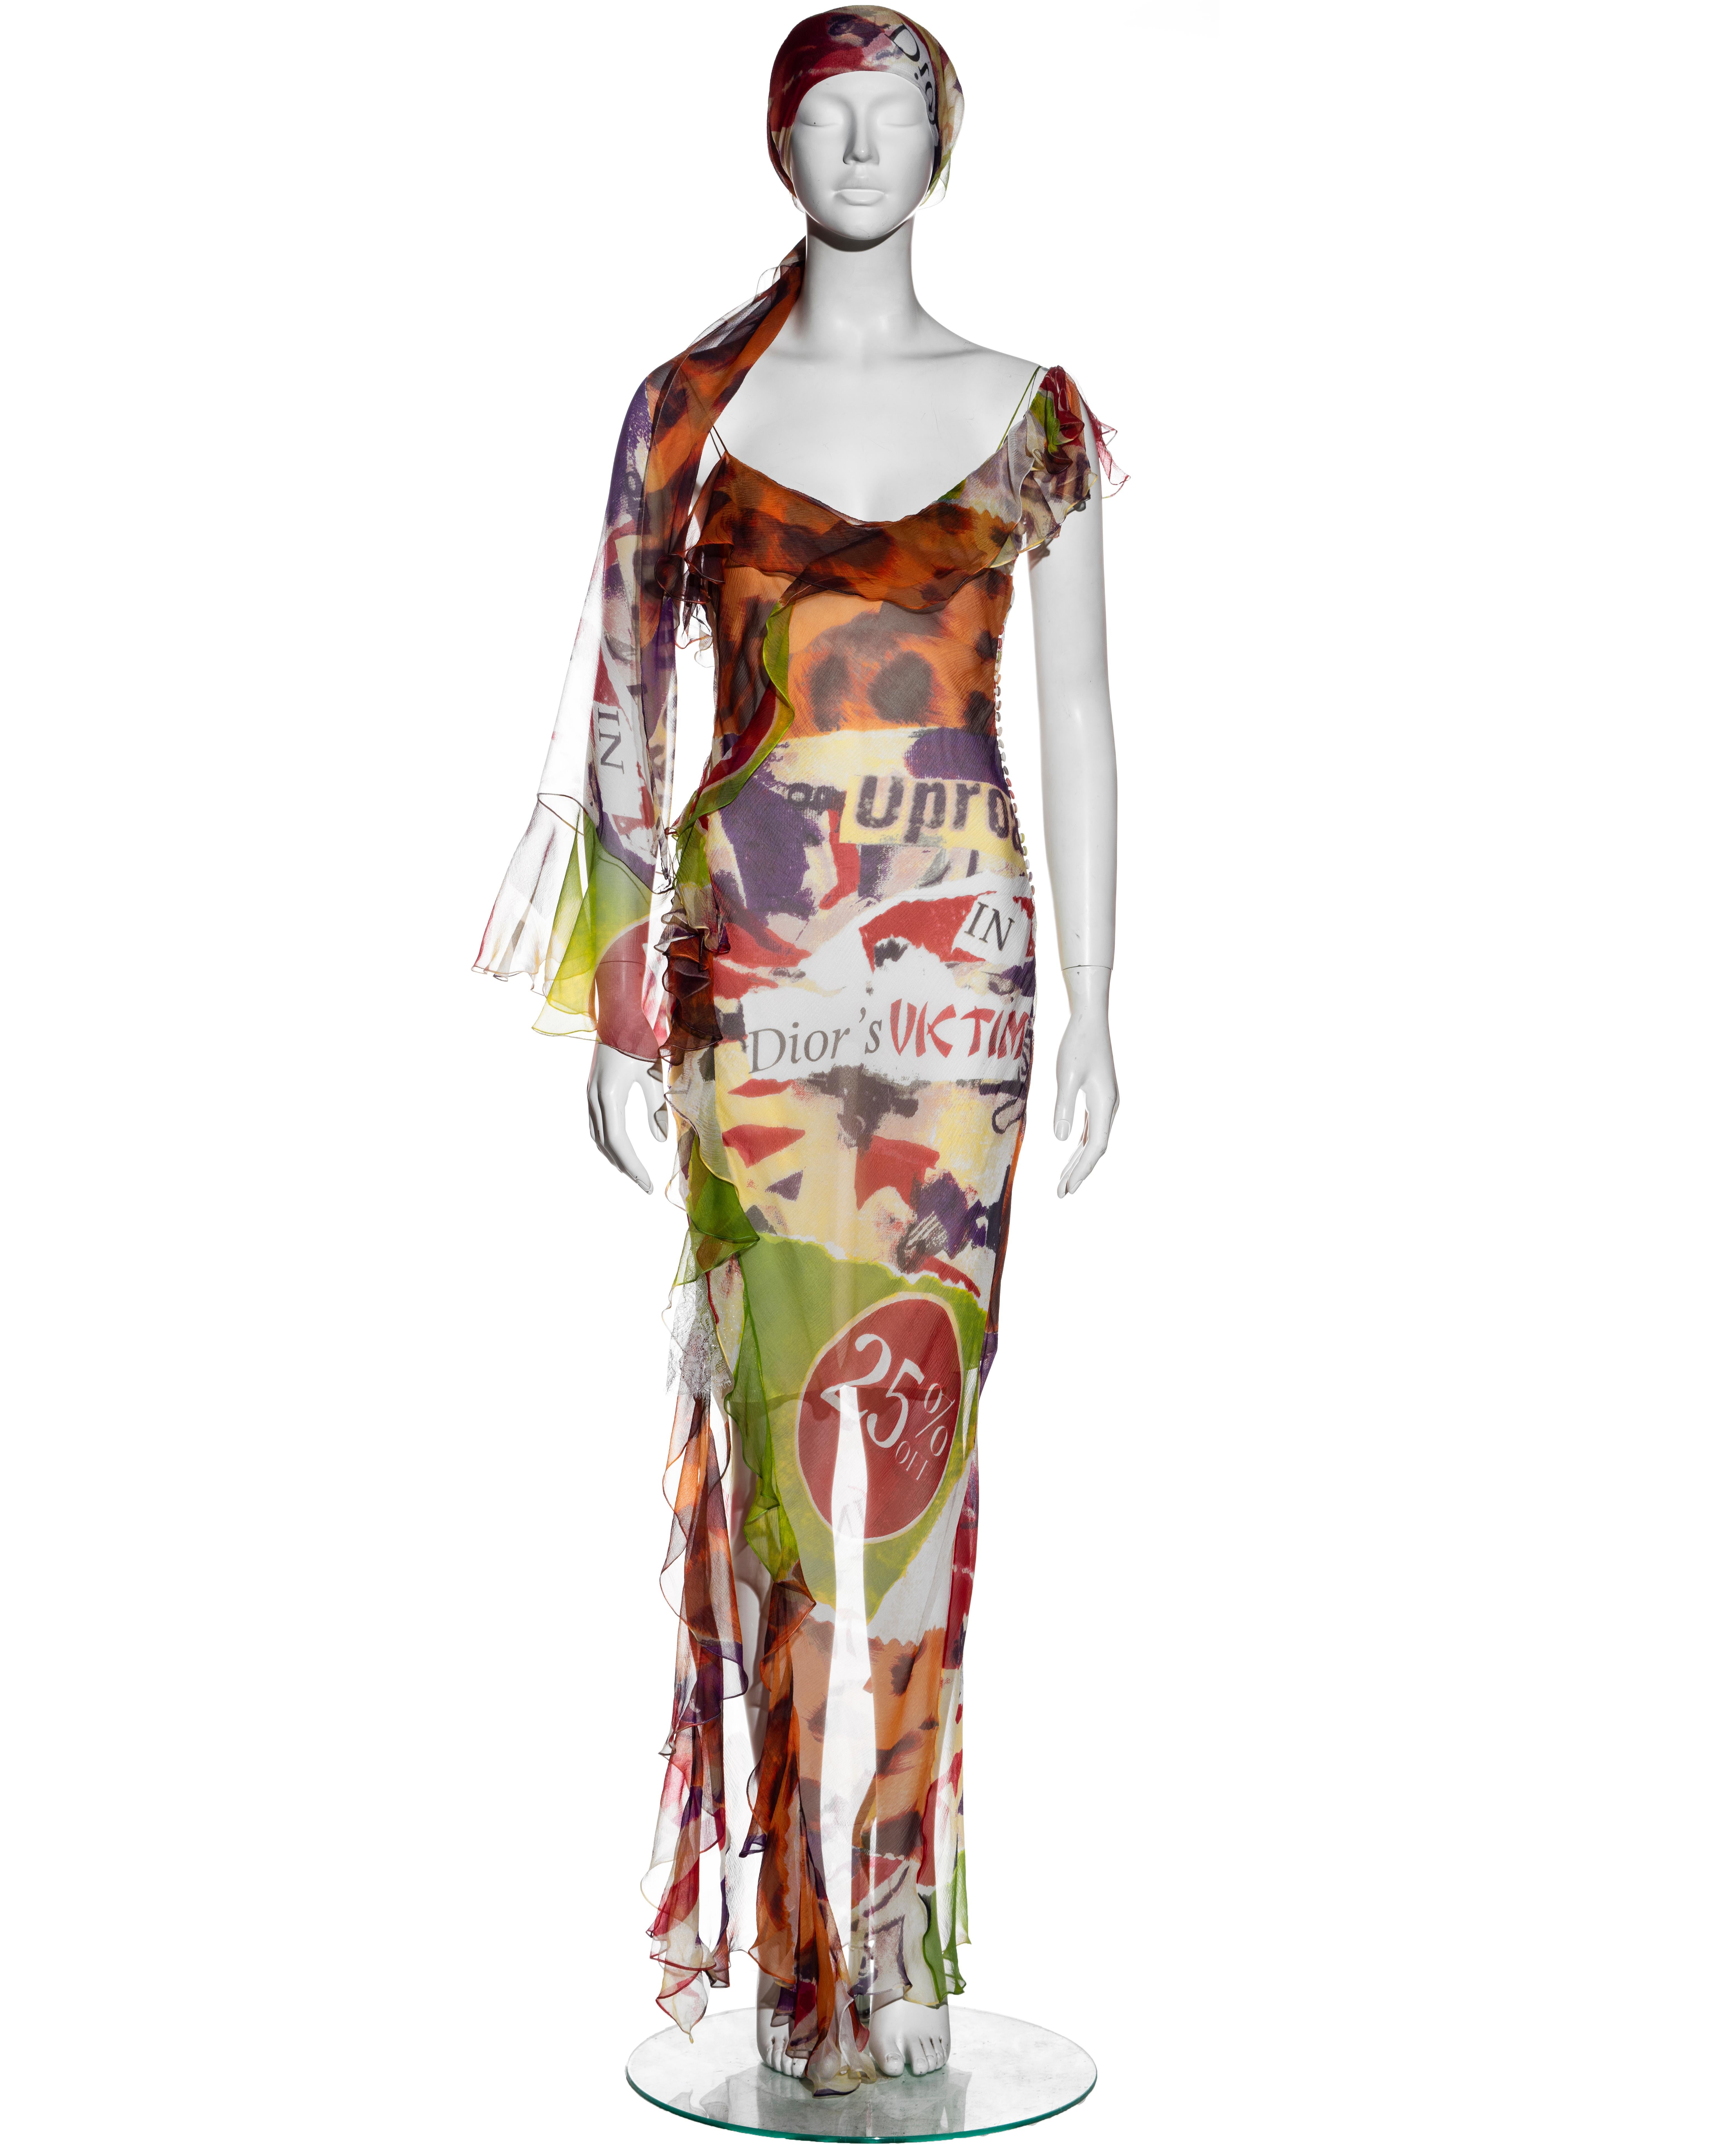 ▪ Christian Dior multicoloured silk chiffon evening dress
▪ Designed by John Galliano
▪ Montage print featuring Union Jack flag, Cheetah print, '25% off' stickers and newspaper clippings 
▪ Spaghetti straps
▪ Leg slit 
▪ Frills around the neckline,